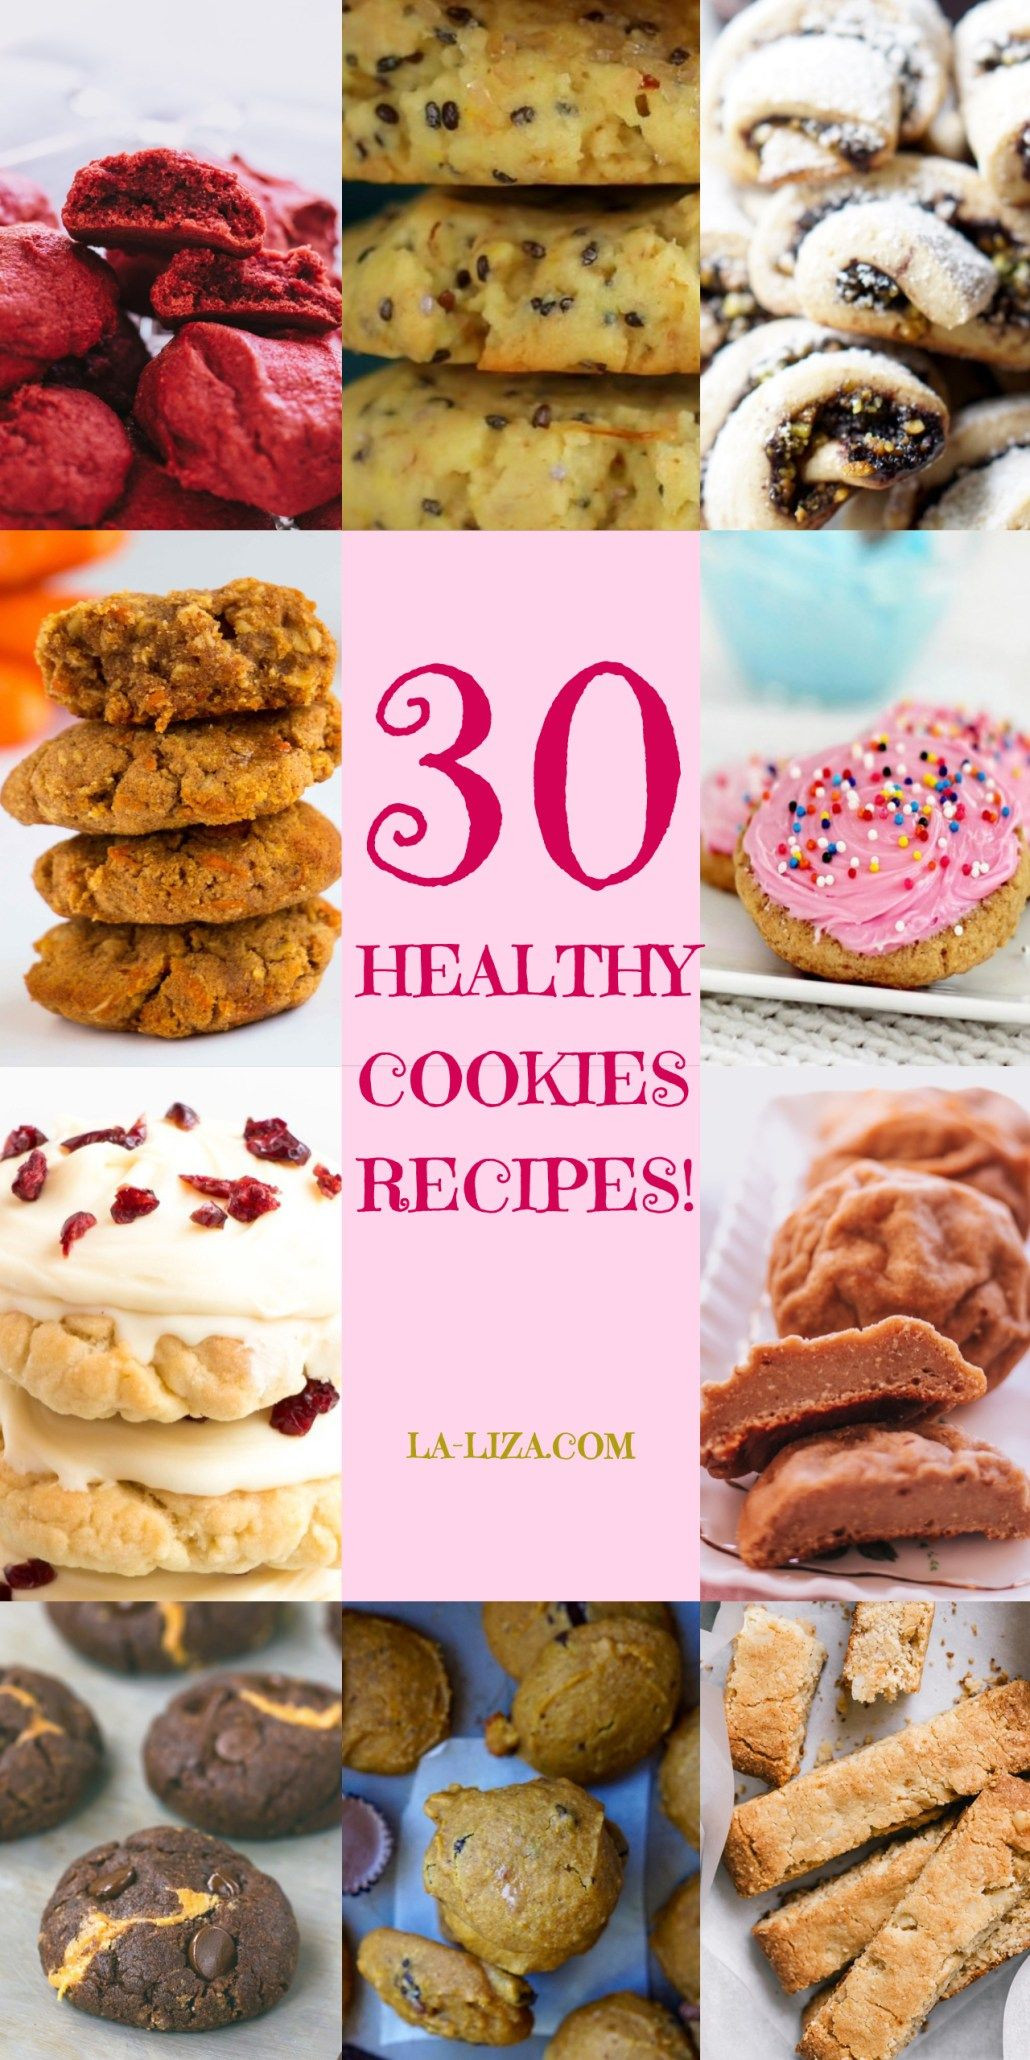 Healthy Cookies Recipe Low Calorie
 healthy cookie recipes